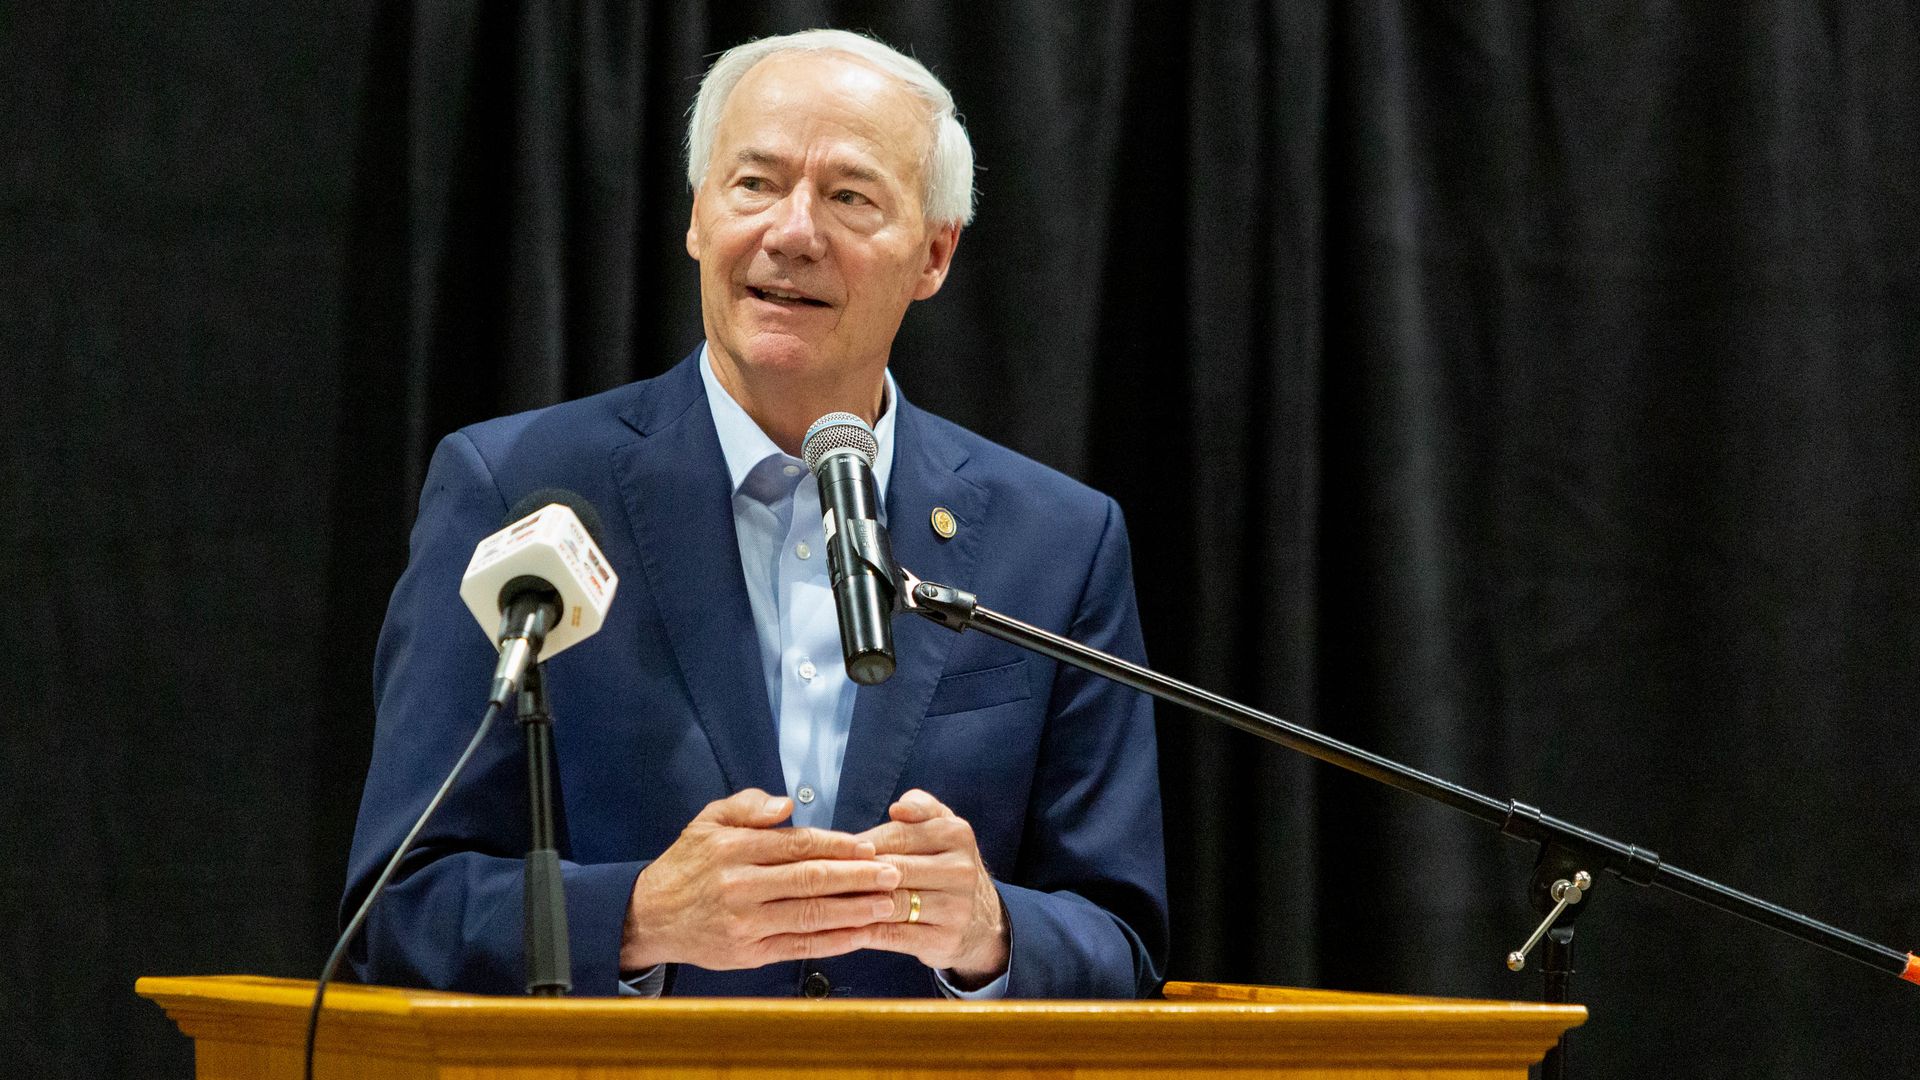 Asa Hutchinson, governor of Arkansas, during a  town hall to promote Covid-19 vaccinations at Arkansas State University Mountain Home (ASUMH) in Mountain Home, Arkansas, U.S., on Monday, July 16.